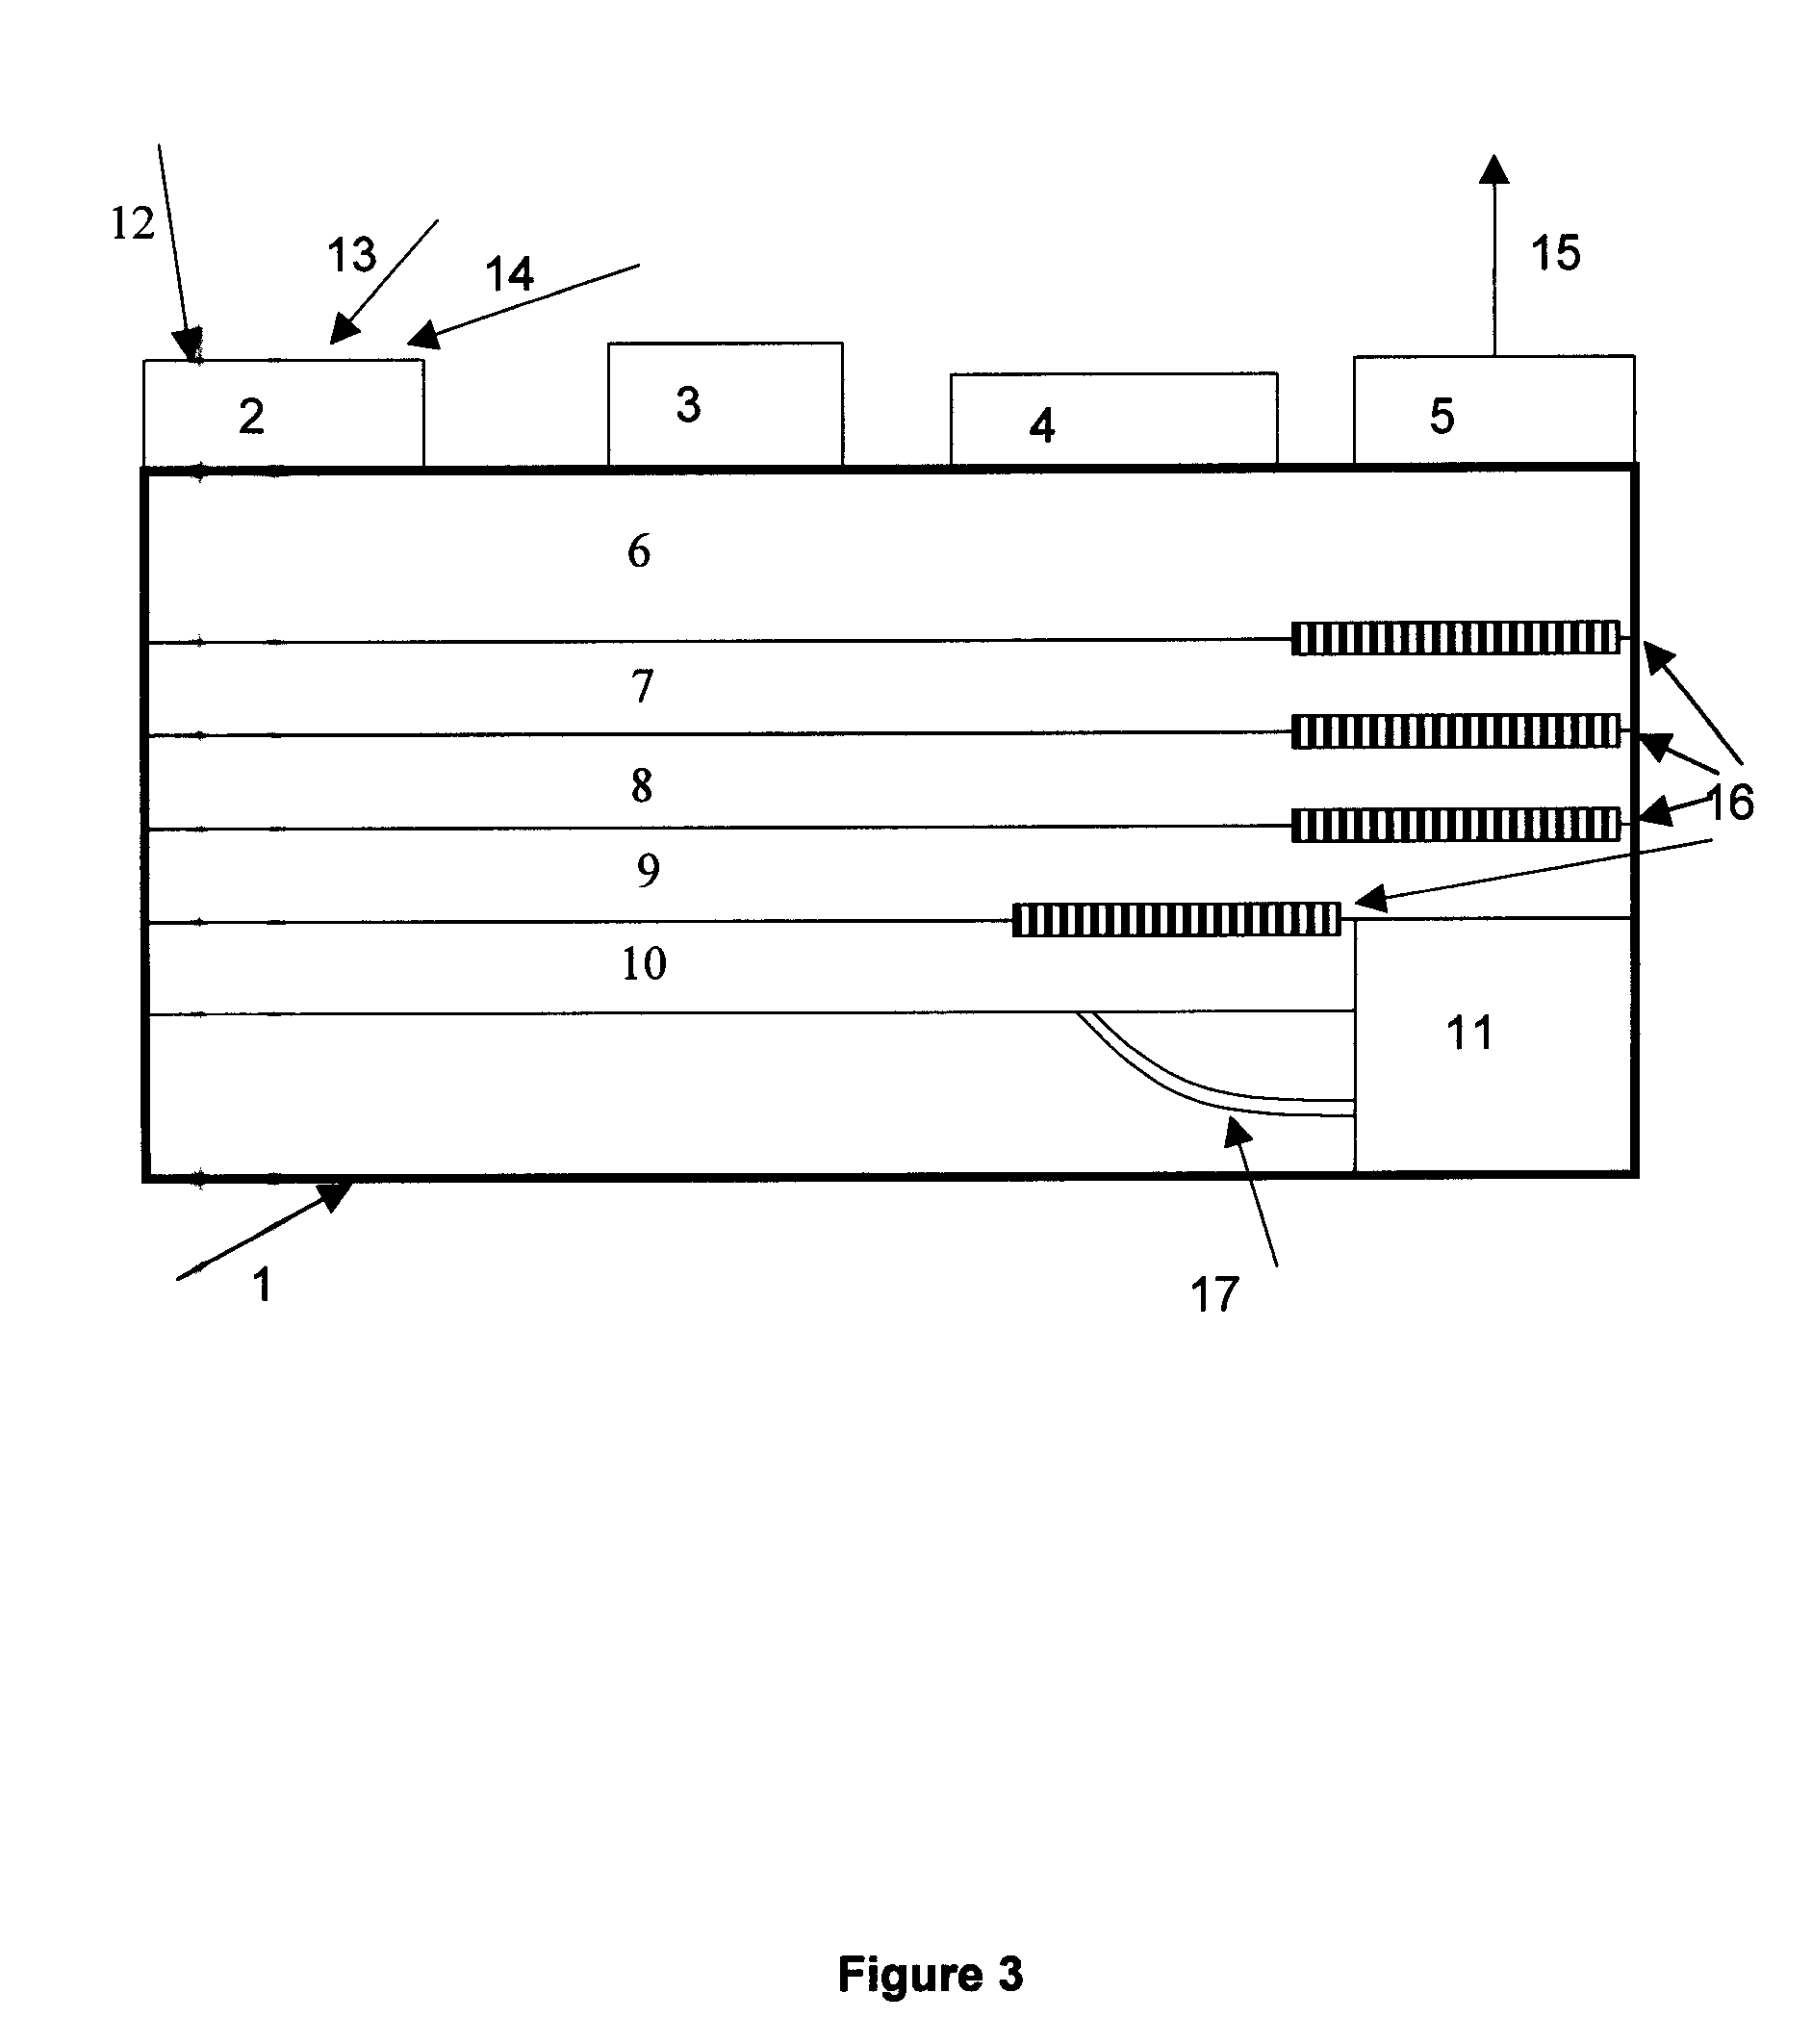 System and method for determining aircraft hard landing events from inertial and aircraft reference frame data